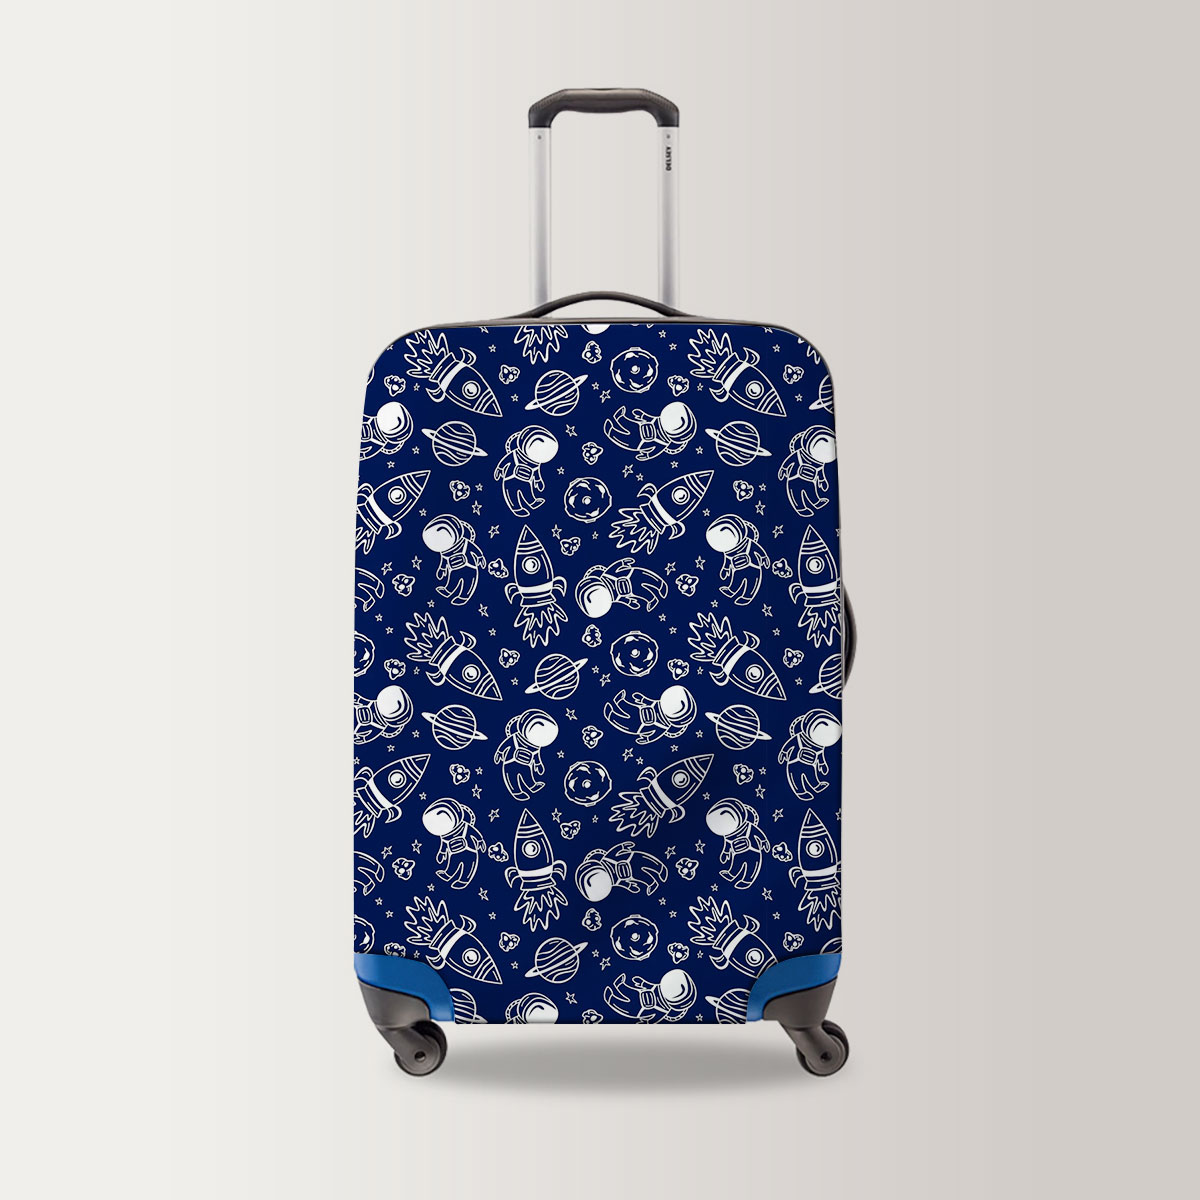 Astronaut in Doodle Style Luggage Bag